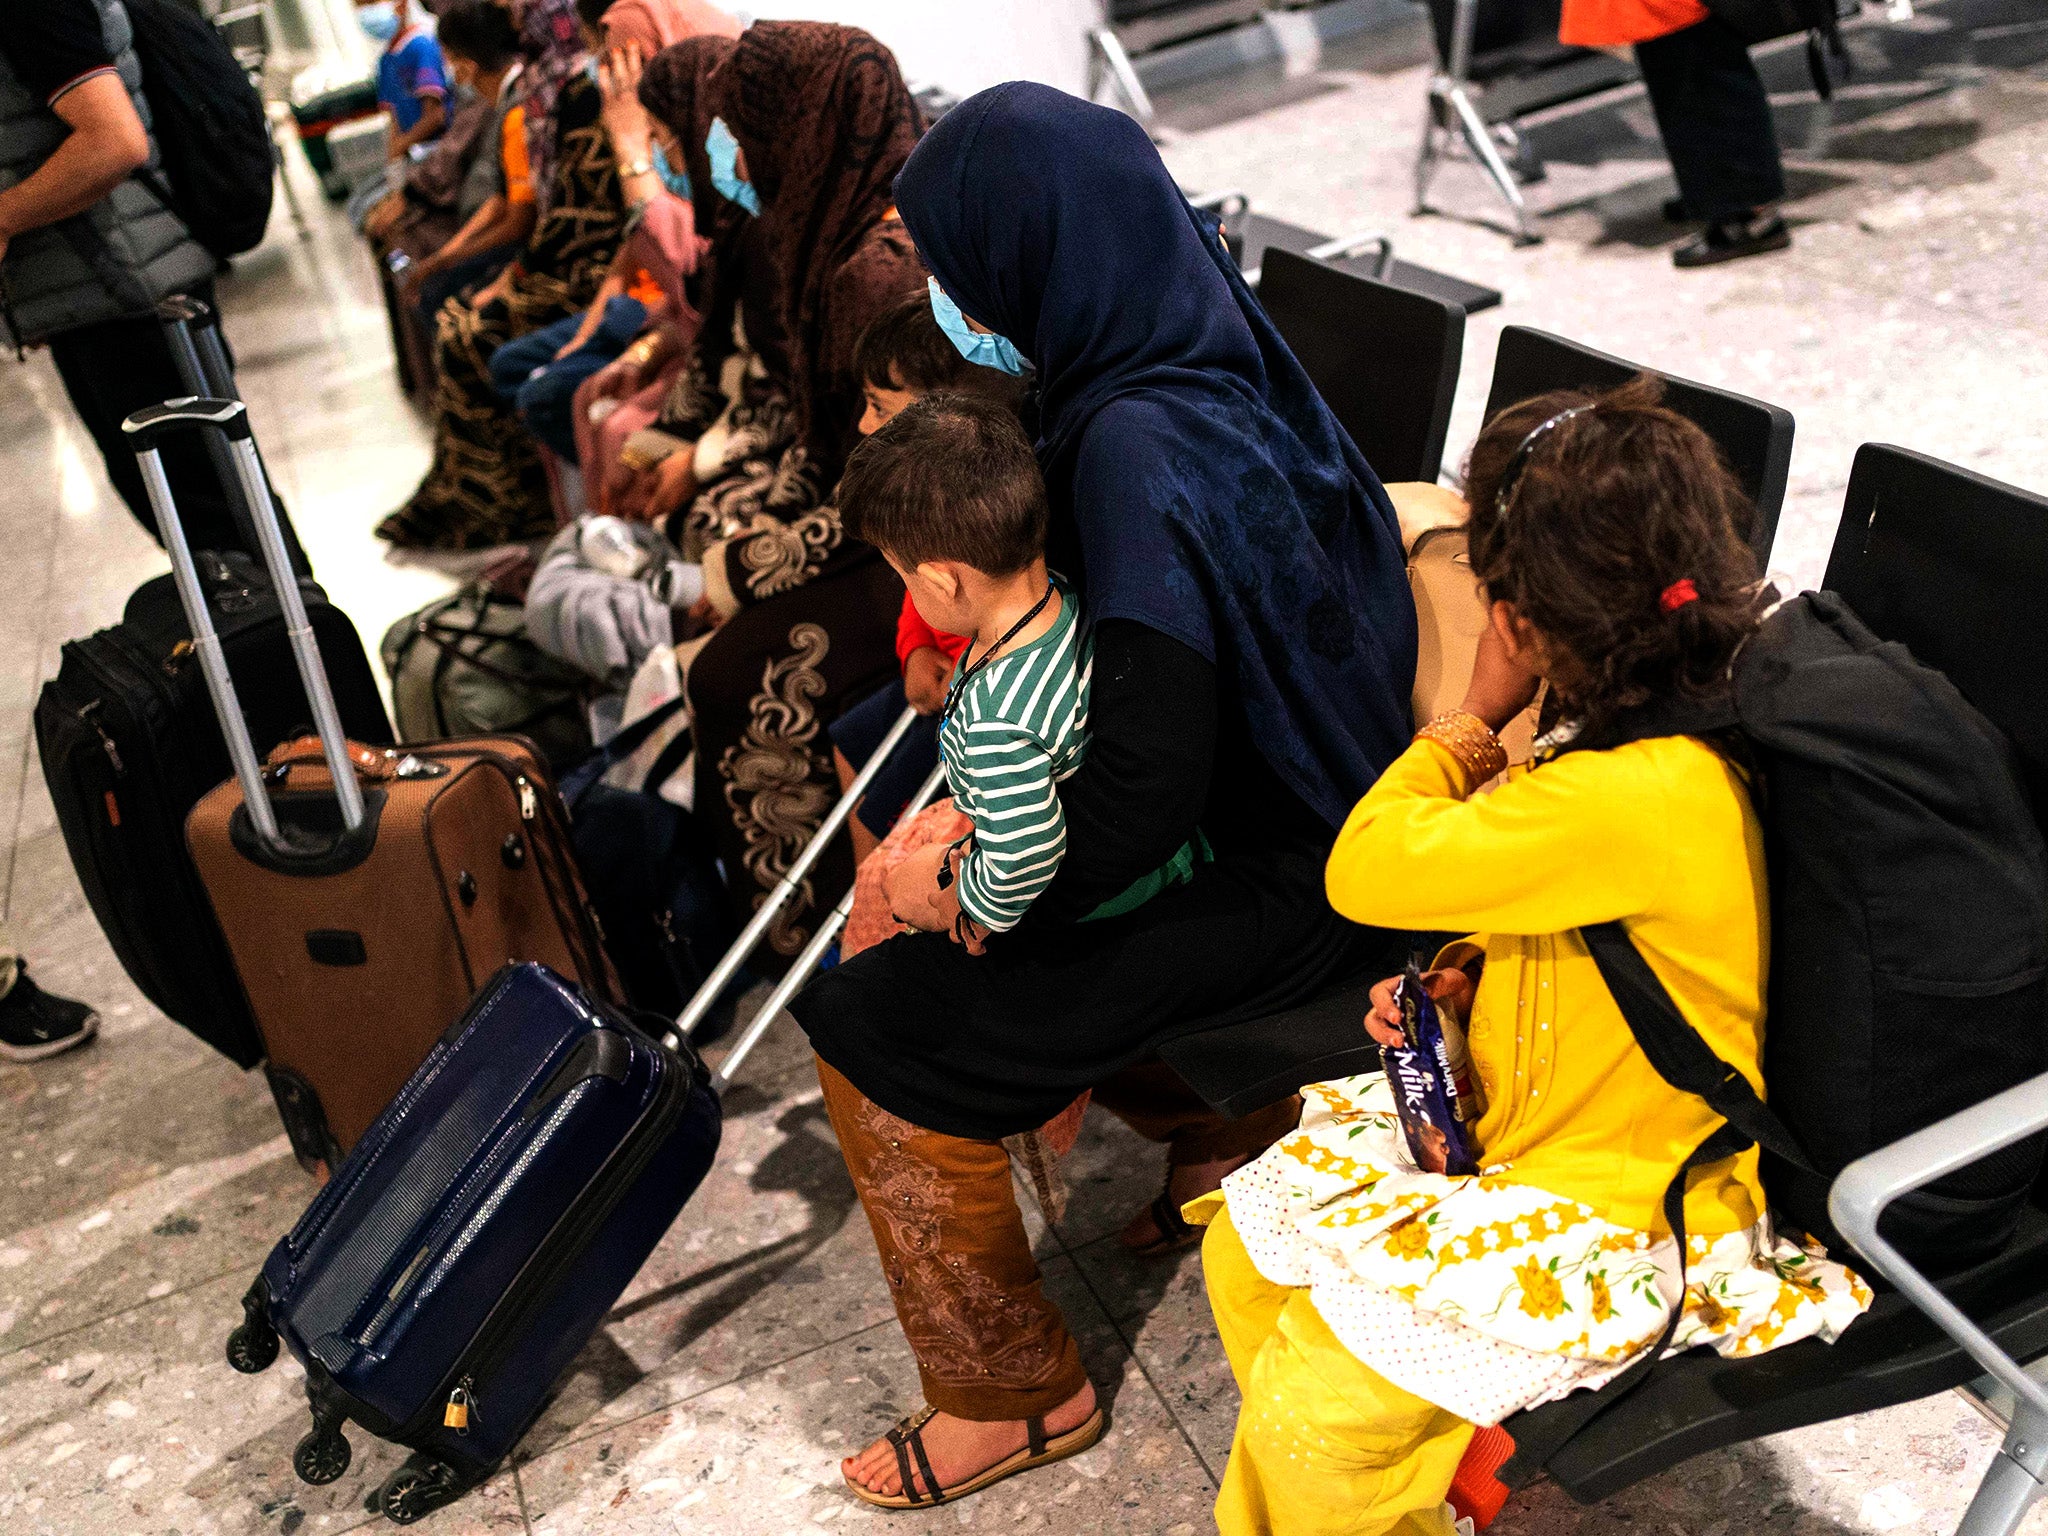 Afghan refugees wait to be processed after arriving on an evacuation flight from Afghanistan, at Heathrow airport in August 2021